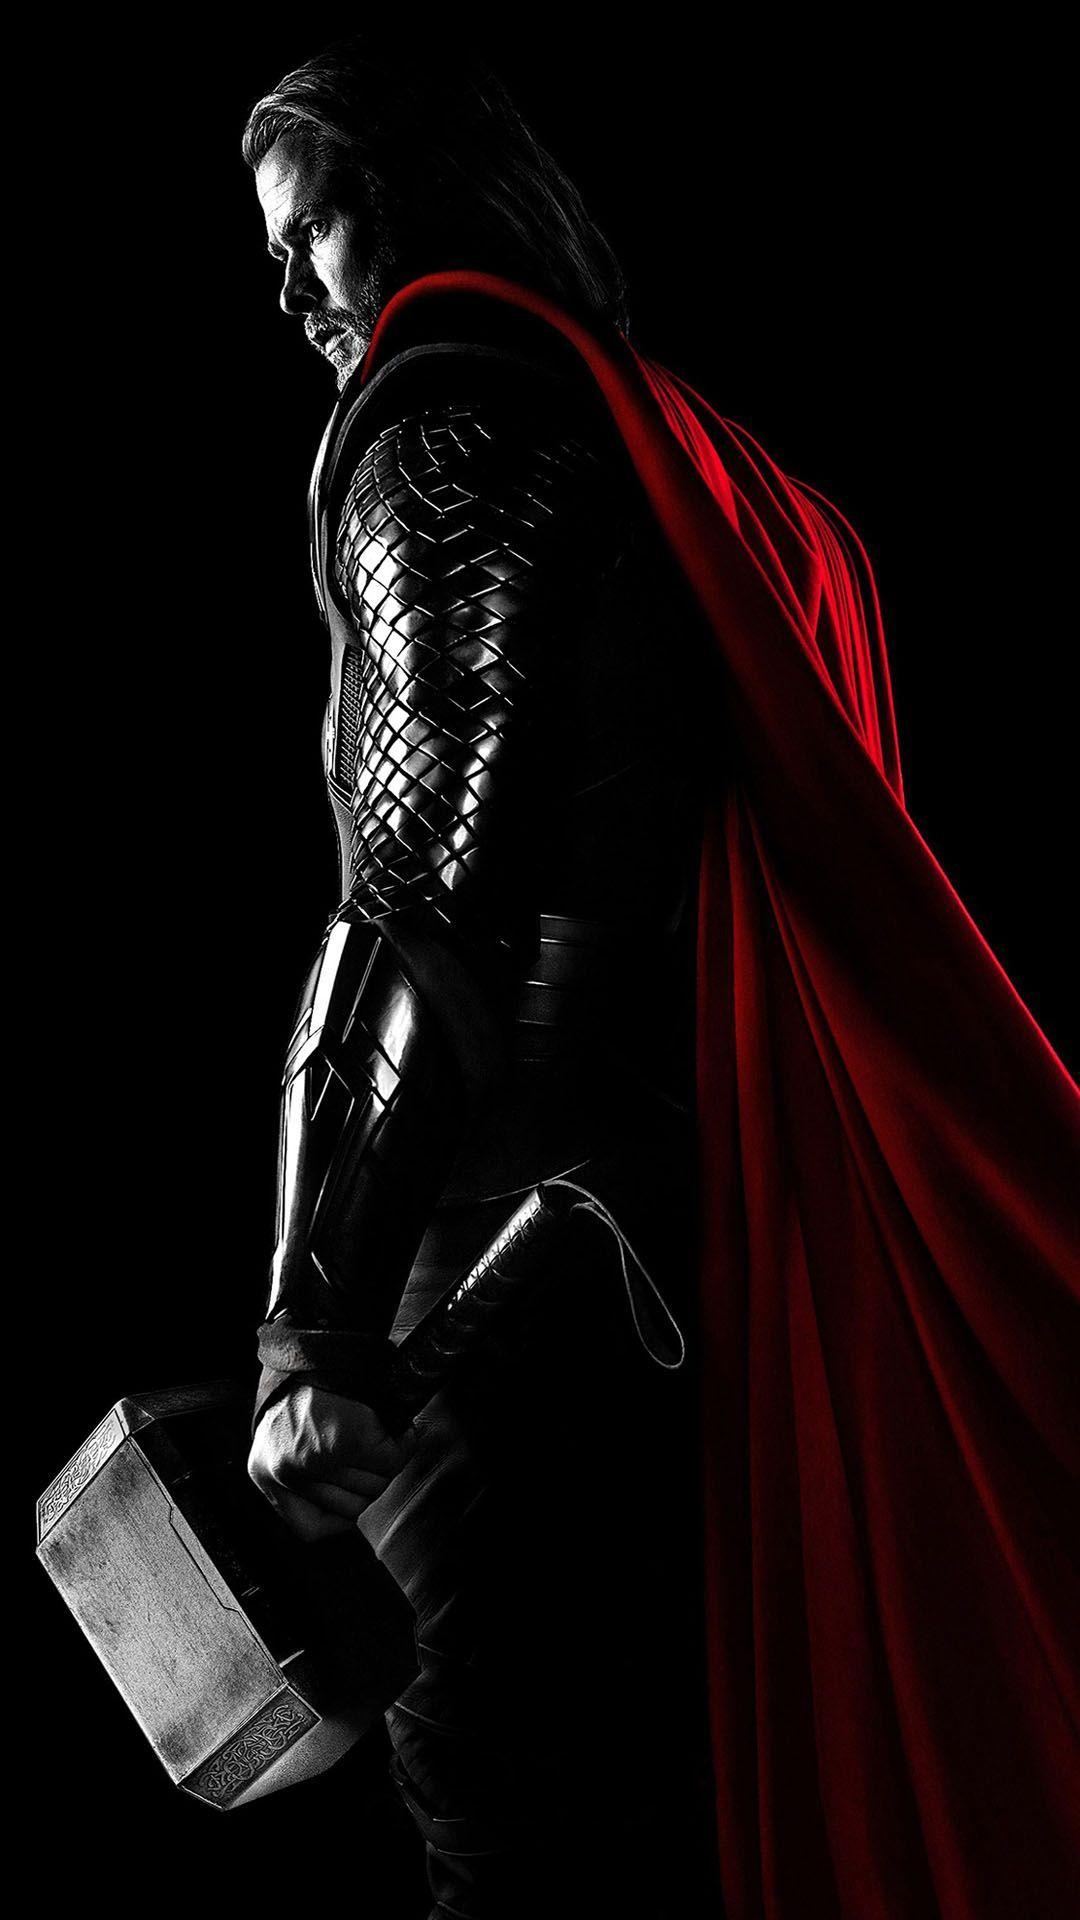 HD Samsung Wallpaper For Mobile Free Download. Thor wallpaper